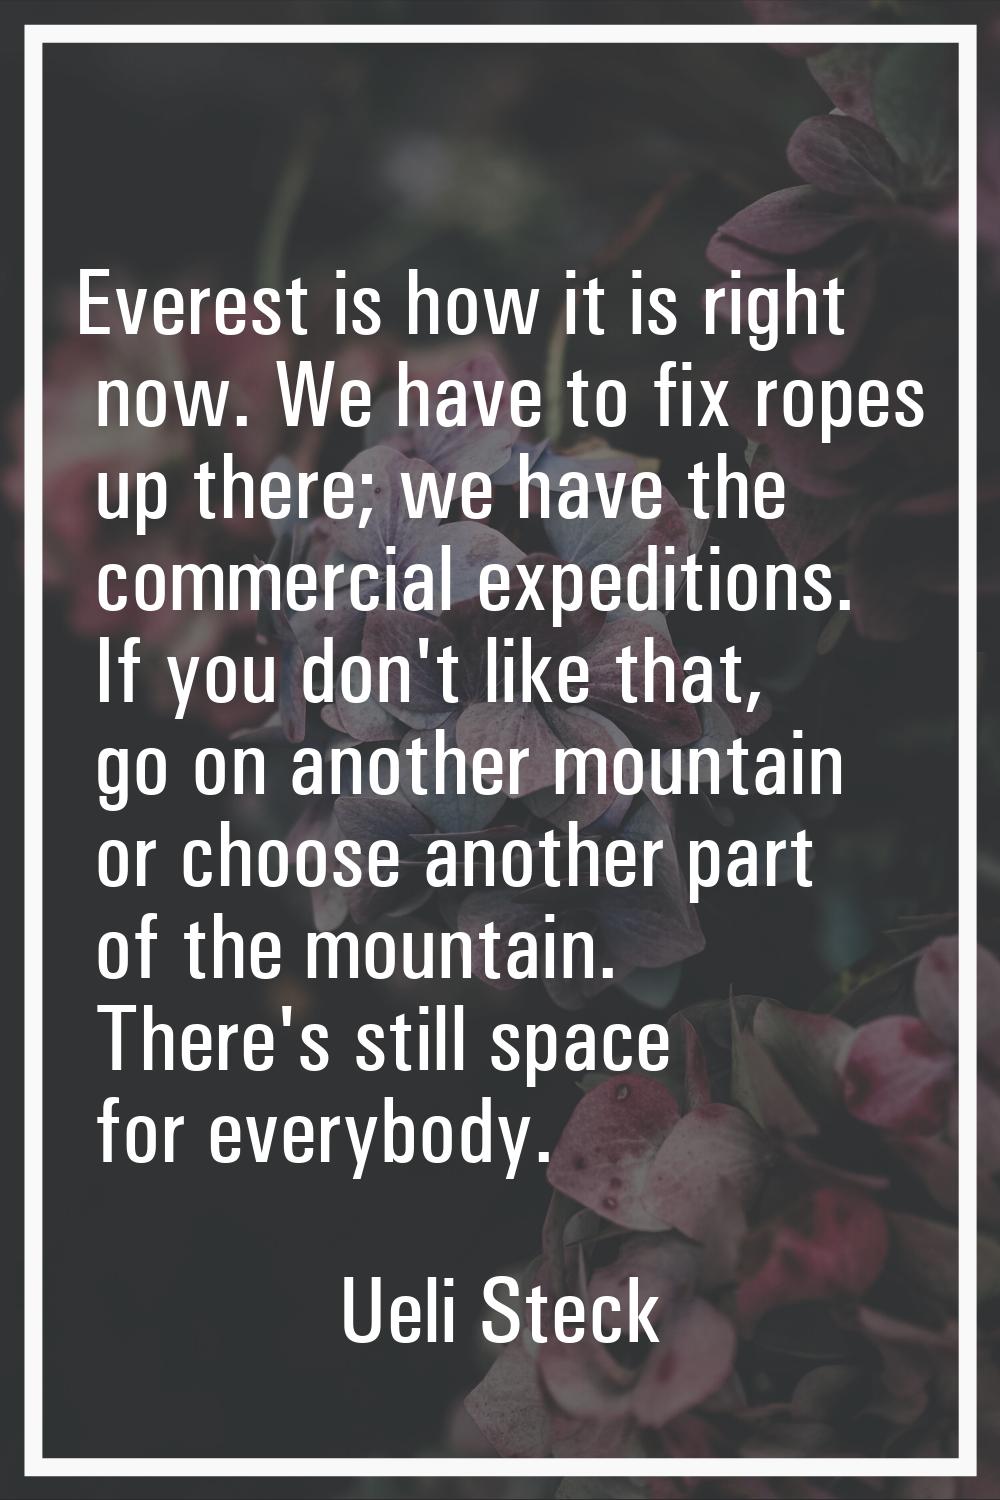 Everest is how it is right now. We have to fix ropes up there; we have the commercial expeditions. 